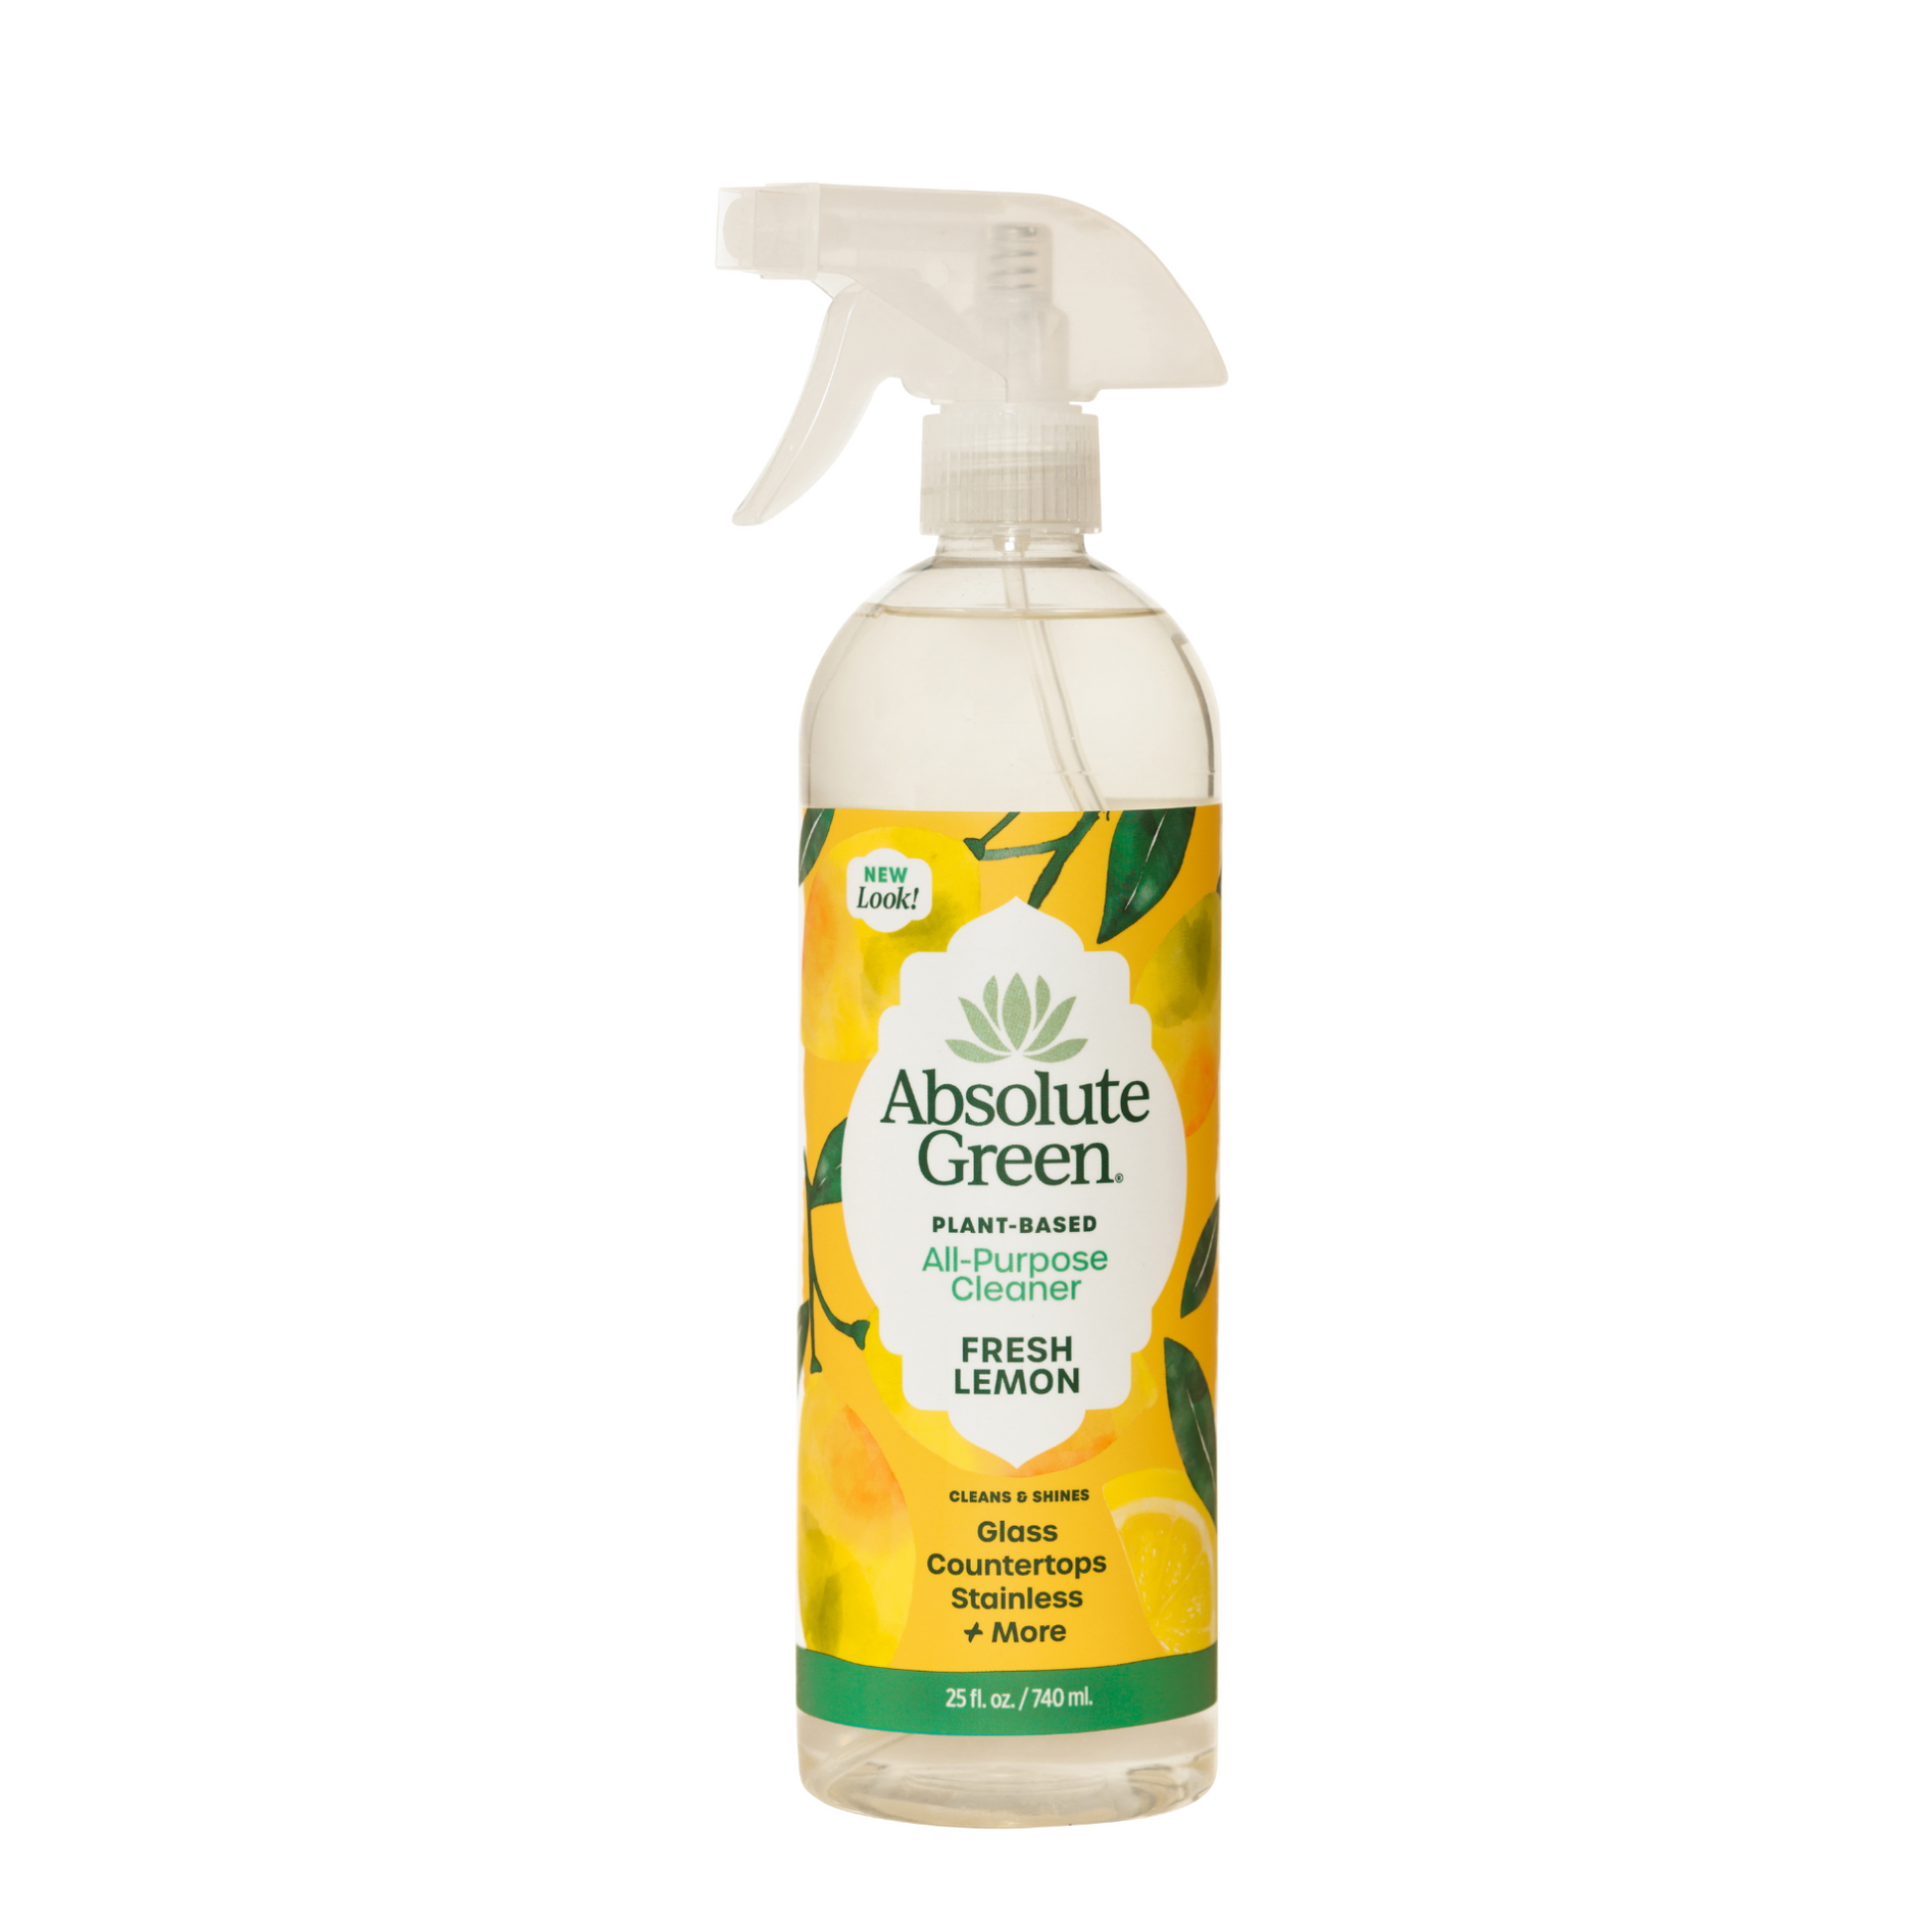 Absolute Green Natural Fresh Lemon Cleaner made from a blend of powerful, plant-based ingredients along with the crisp, clean scent of pure lemons. Effectively cleans all surfaces.  